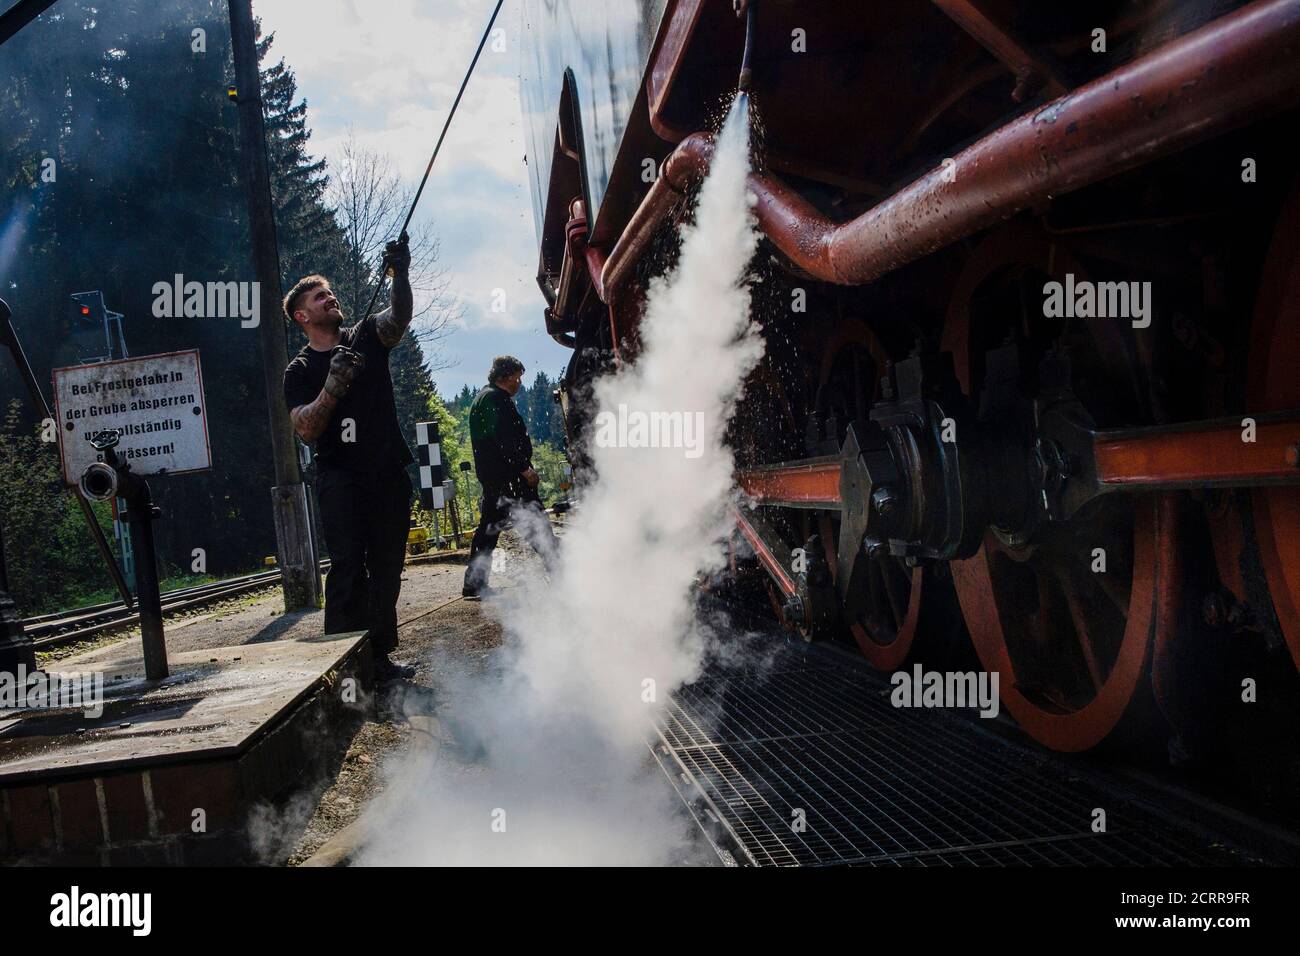 The driver of a steam locomotive of the HSB light railway prepares water tank to be refilled in Schierke in the Harz mountains, April 30, 2014. Legend has it that on Walpurgisnacht or May Eve, witches fly their broomsticks to meet the devil at the summit of the Brocken Mountain in Harz. In towns and villages scattered throughout the mountain region, locals make bonfires, dress in devil or witches costumes and dance into the new month of May. Picture taken April 30, 2014.  REUTERS/Thomas Peter (GERMANY - Tags: SOCIETY TRANSPORT) Stock Photo